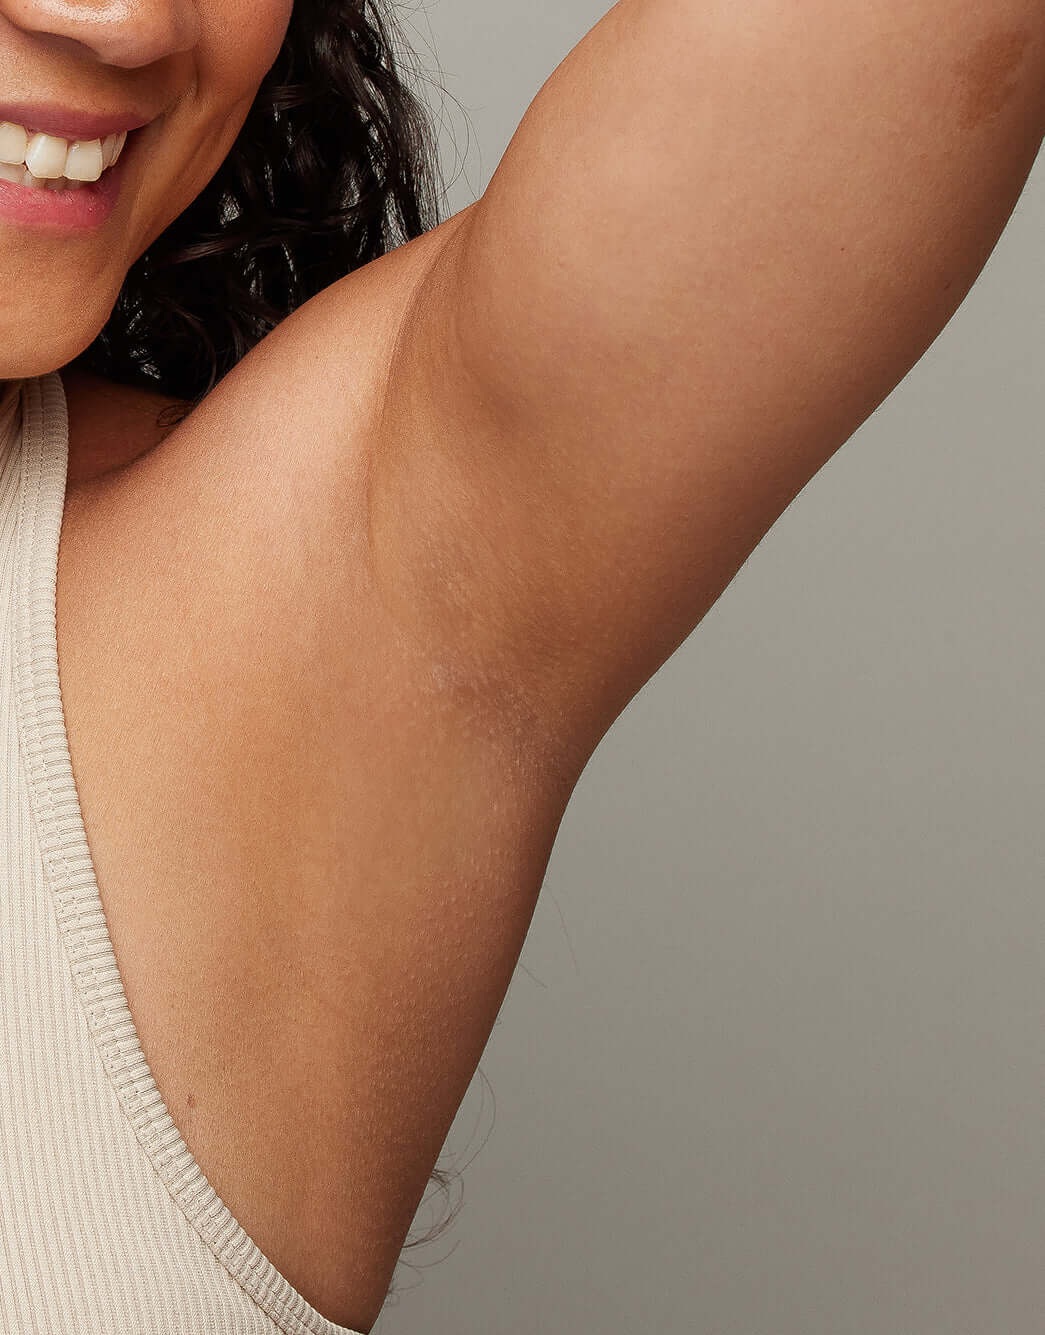 Effective IPL Hair Removal for Underarm area with Ulike Air